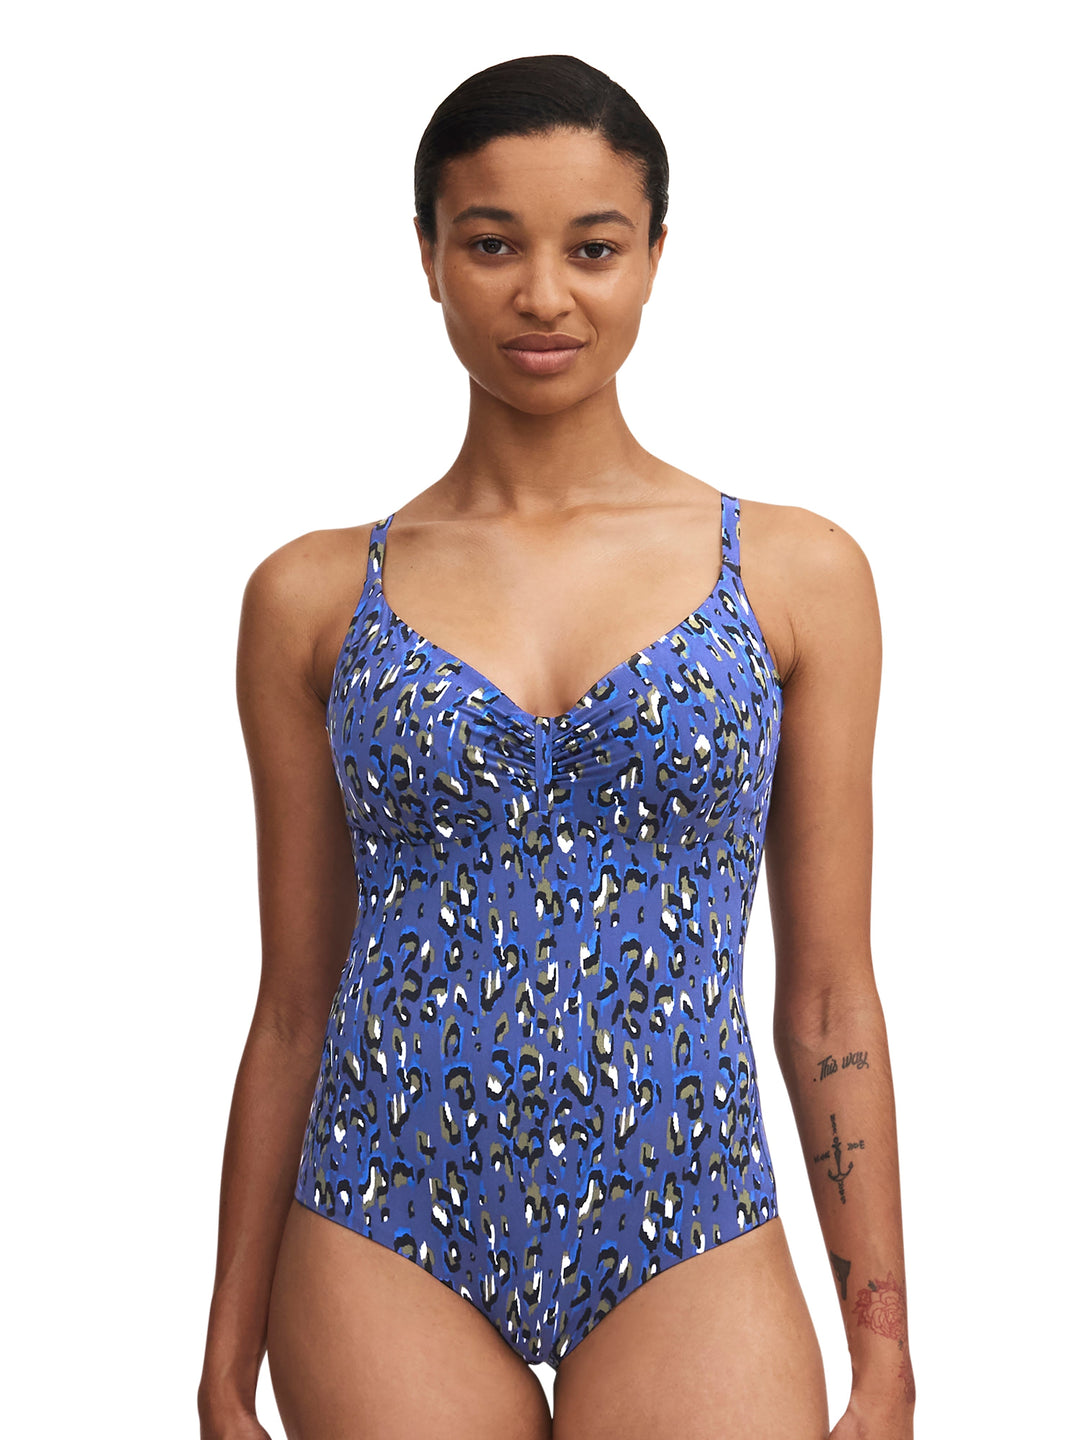 Chantelle Swimwear Eos Covering Underwired Swimsuit - Blue Leopard Full Cup Badeanzug Chantelle